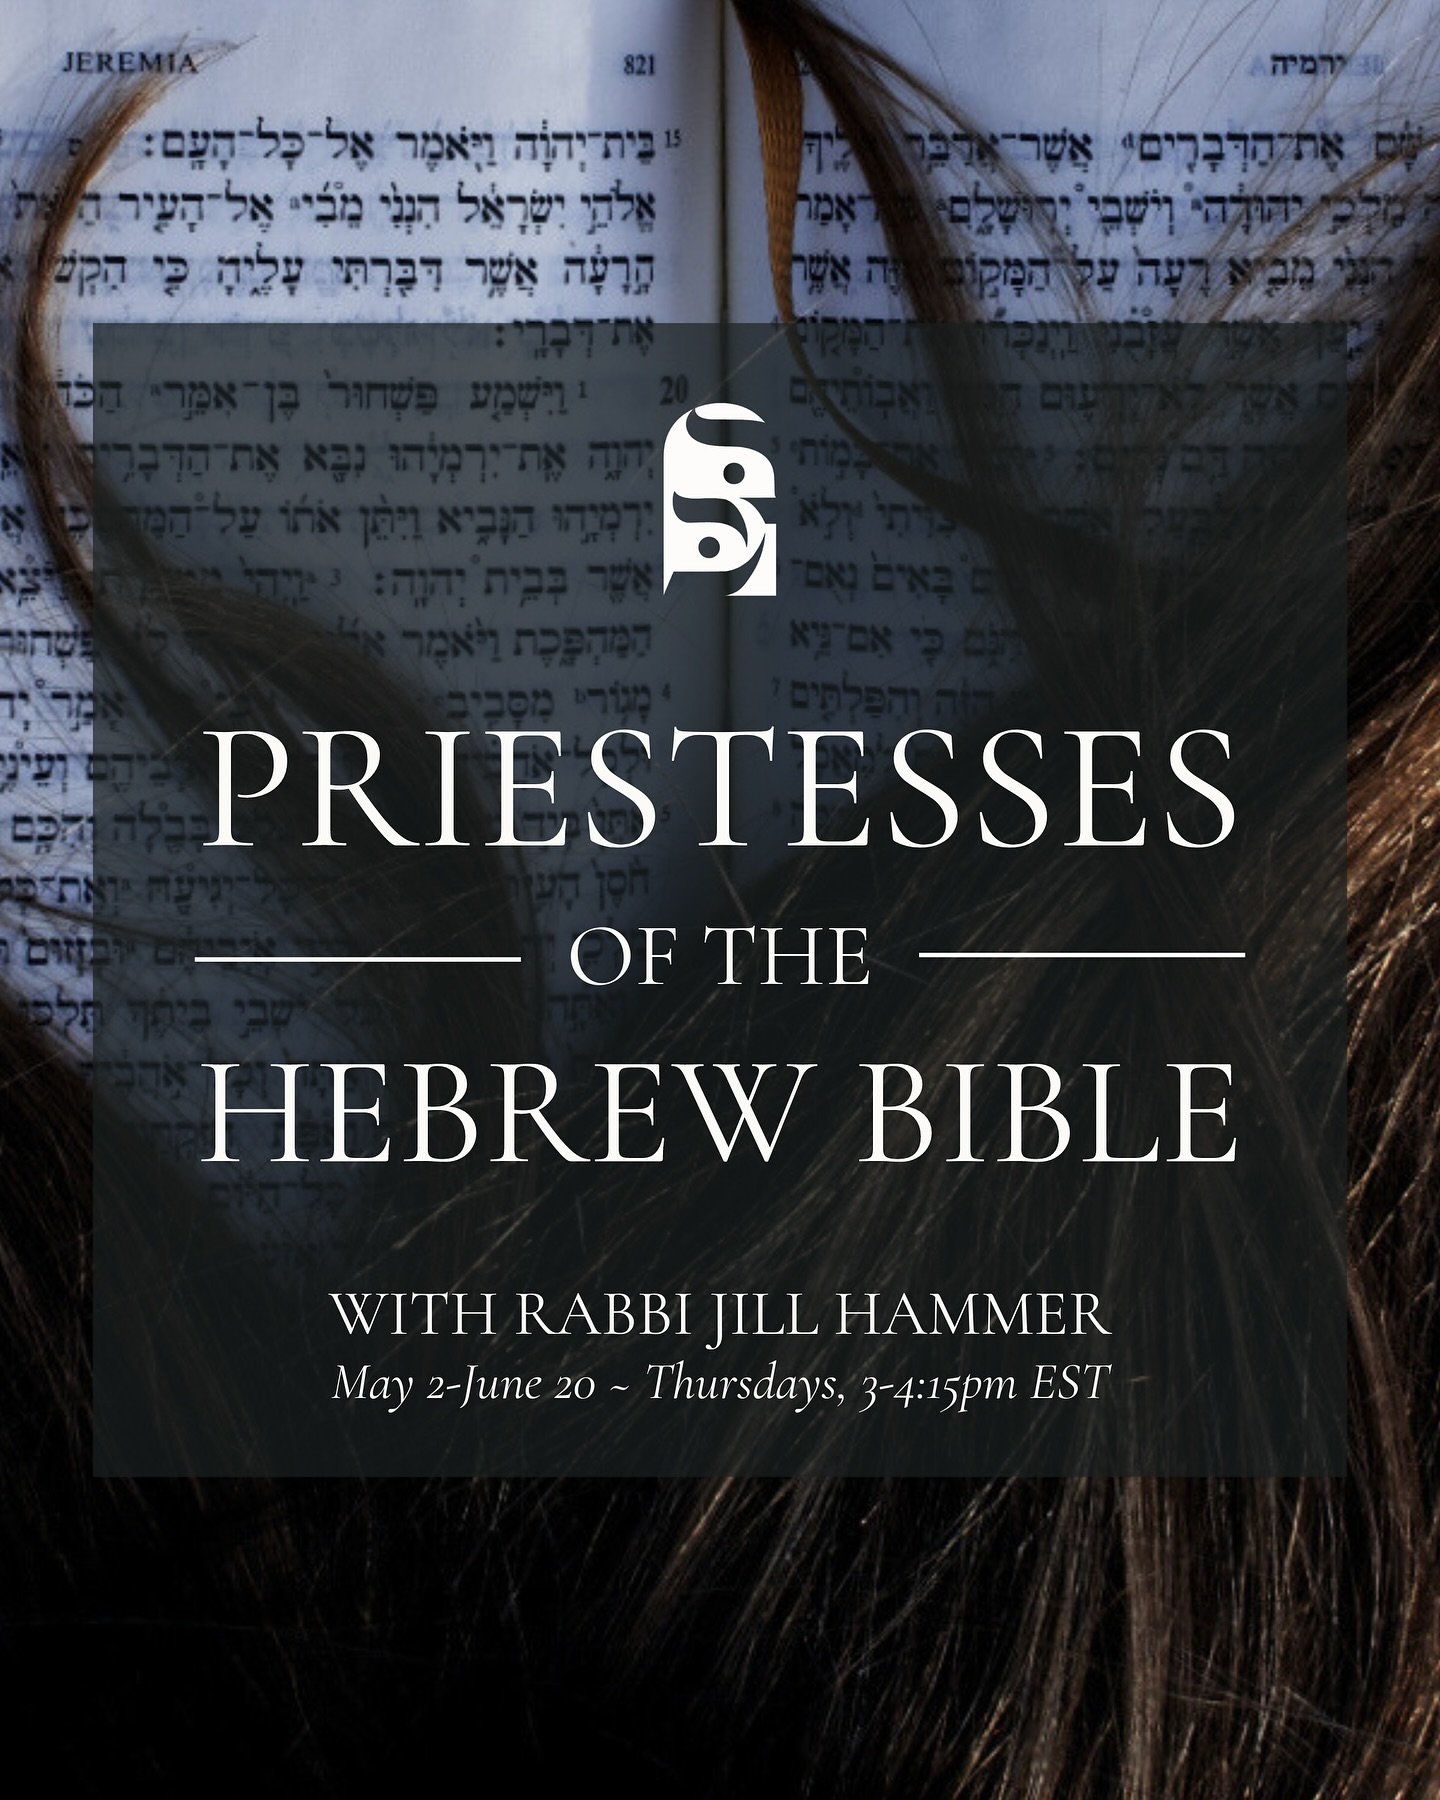 ✦ PRIESTESSES OF THE HEBREW BIBLE WITH RABBI JILL HAMMER | MAY 2-JUNE 20⁣ ✦
⁣
Where can we find priestess role models in the Hebrew Bible? What are the practices, skills, or approaches we could learn from them? From Miriam to Tamar, from Chanah to De